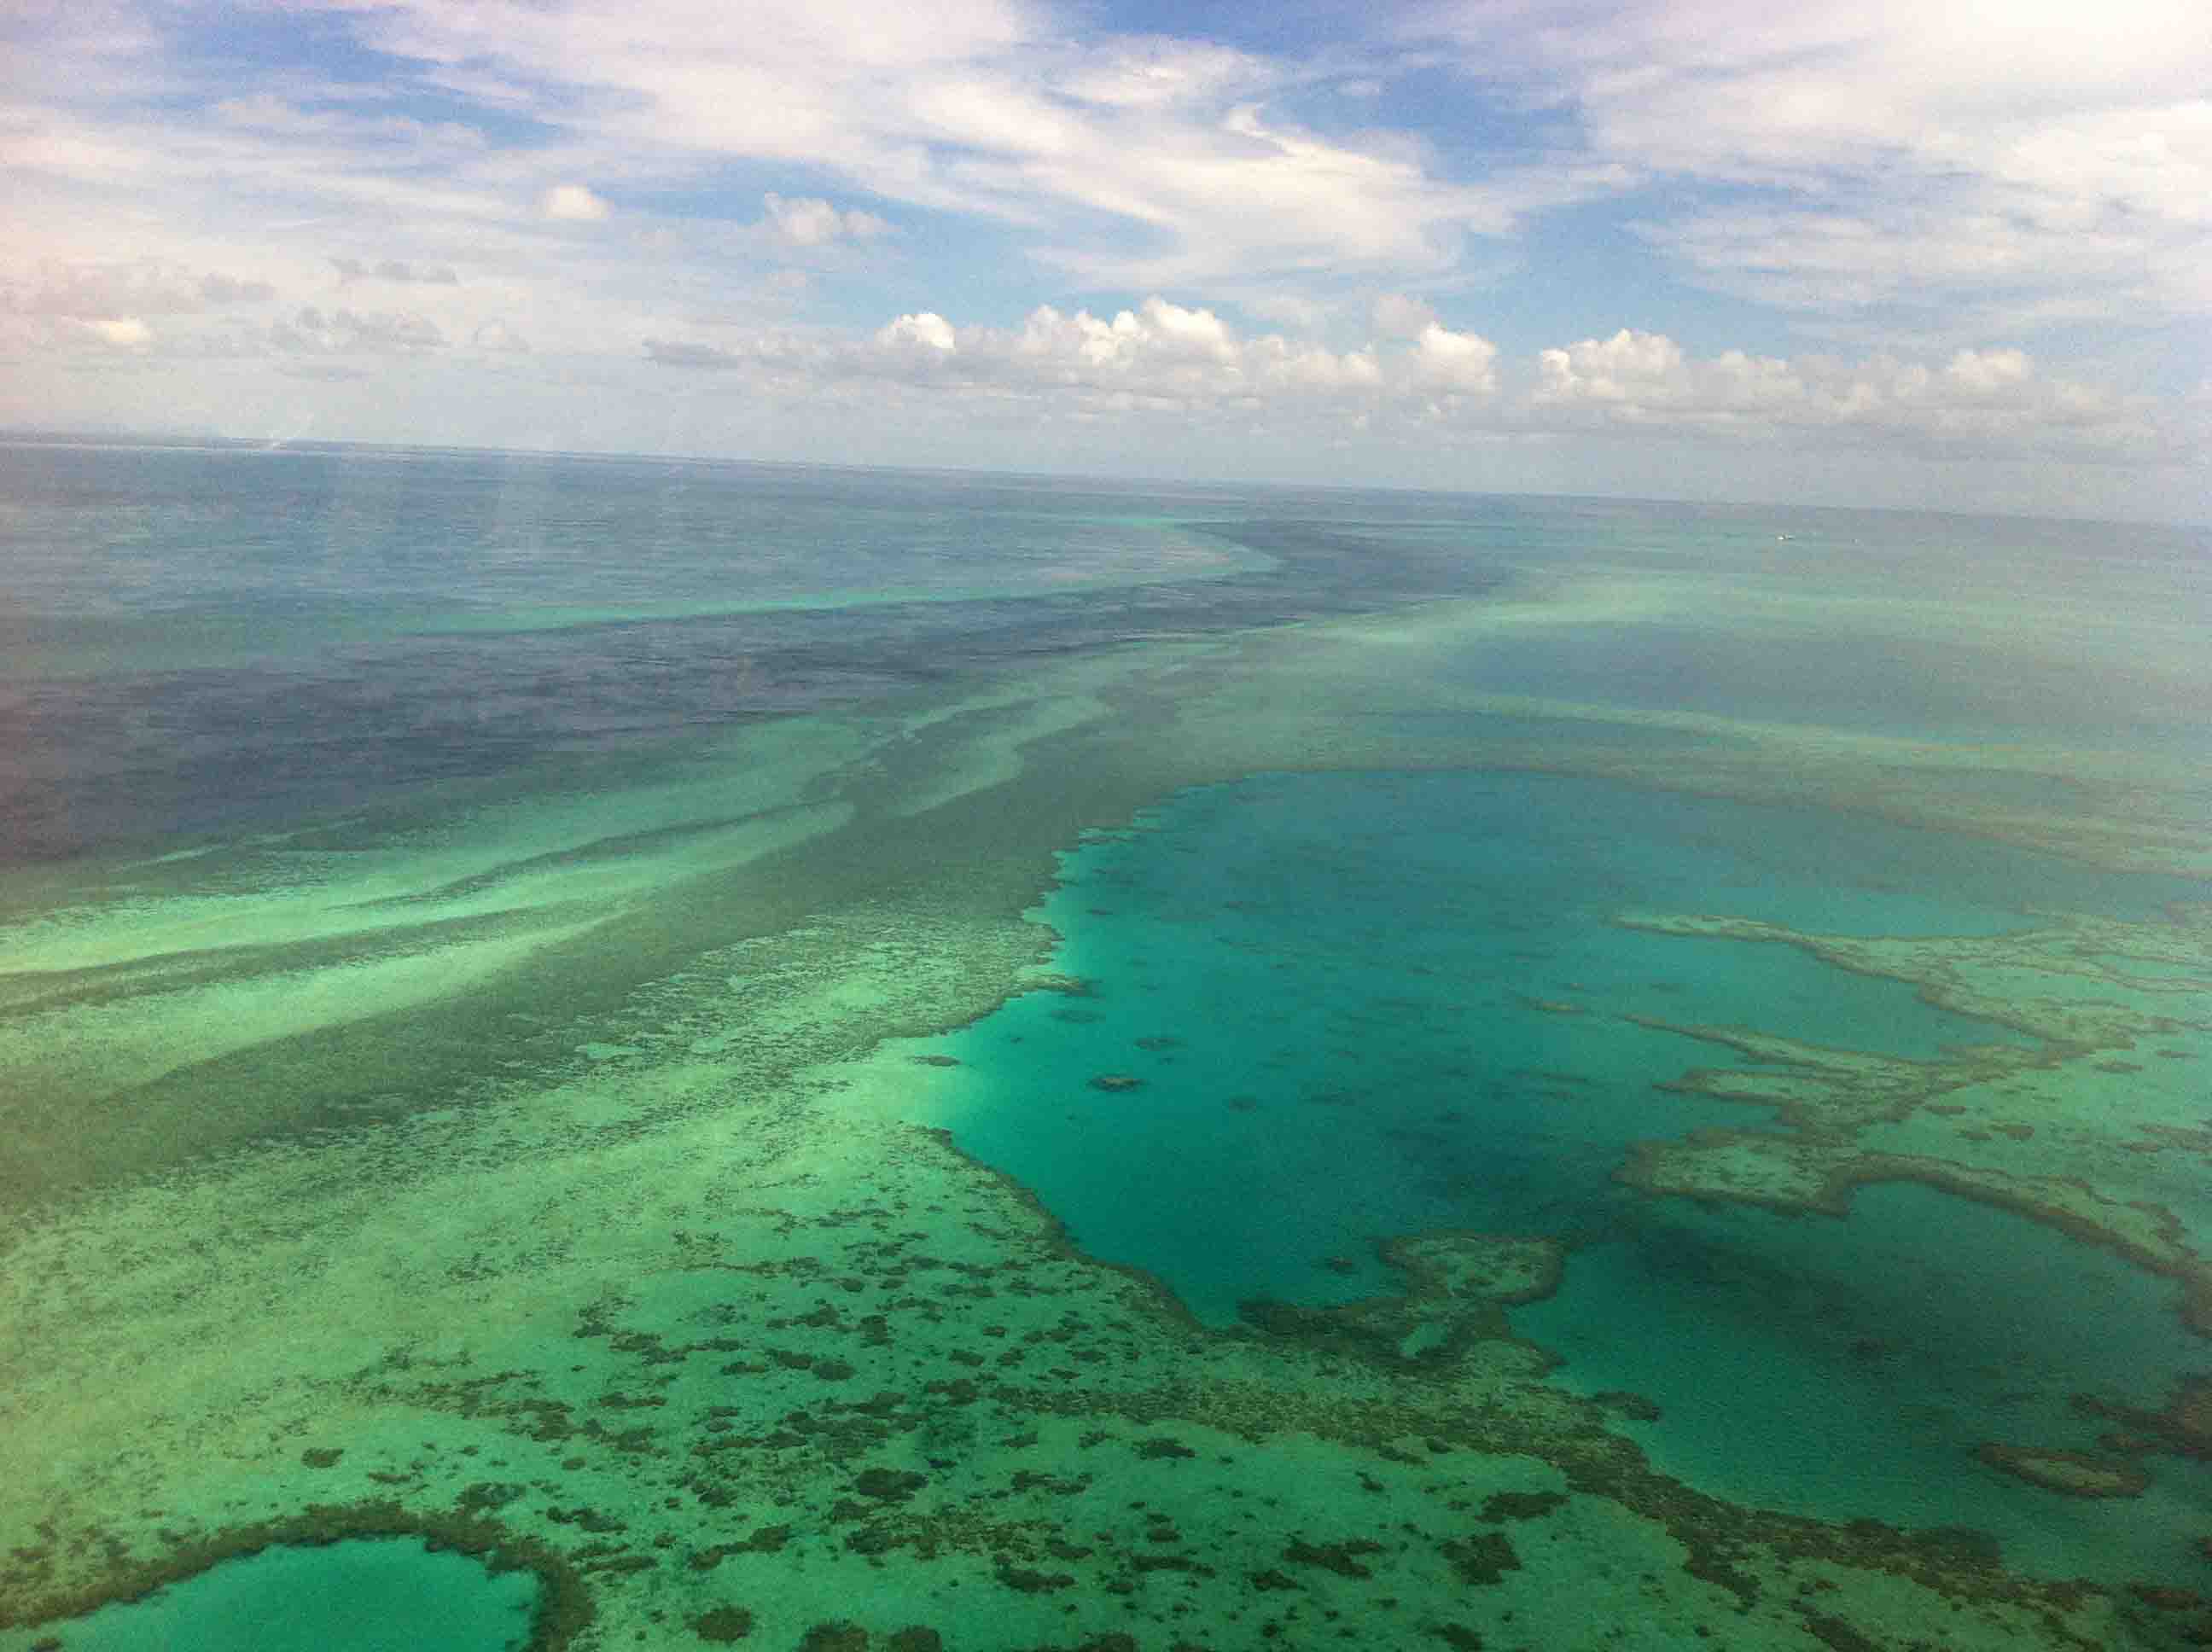 Helicopter Tour & Scuba Diving in The Great Barrier Reef